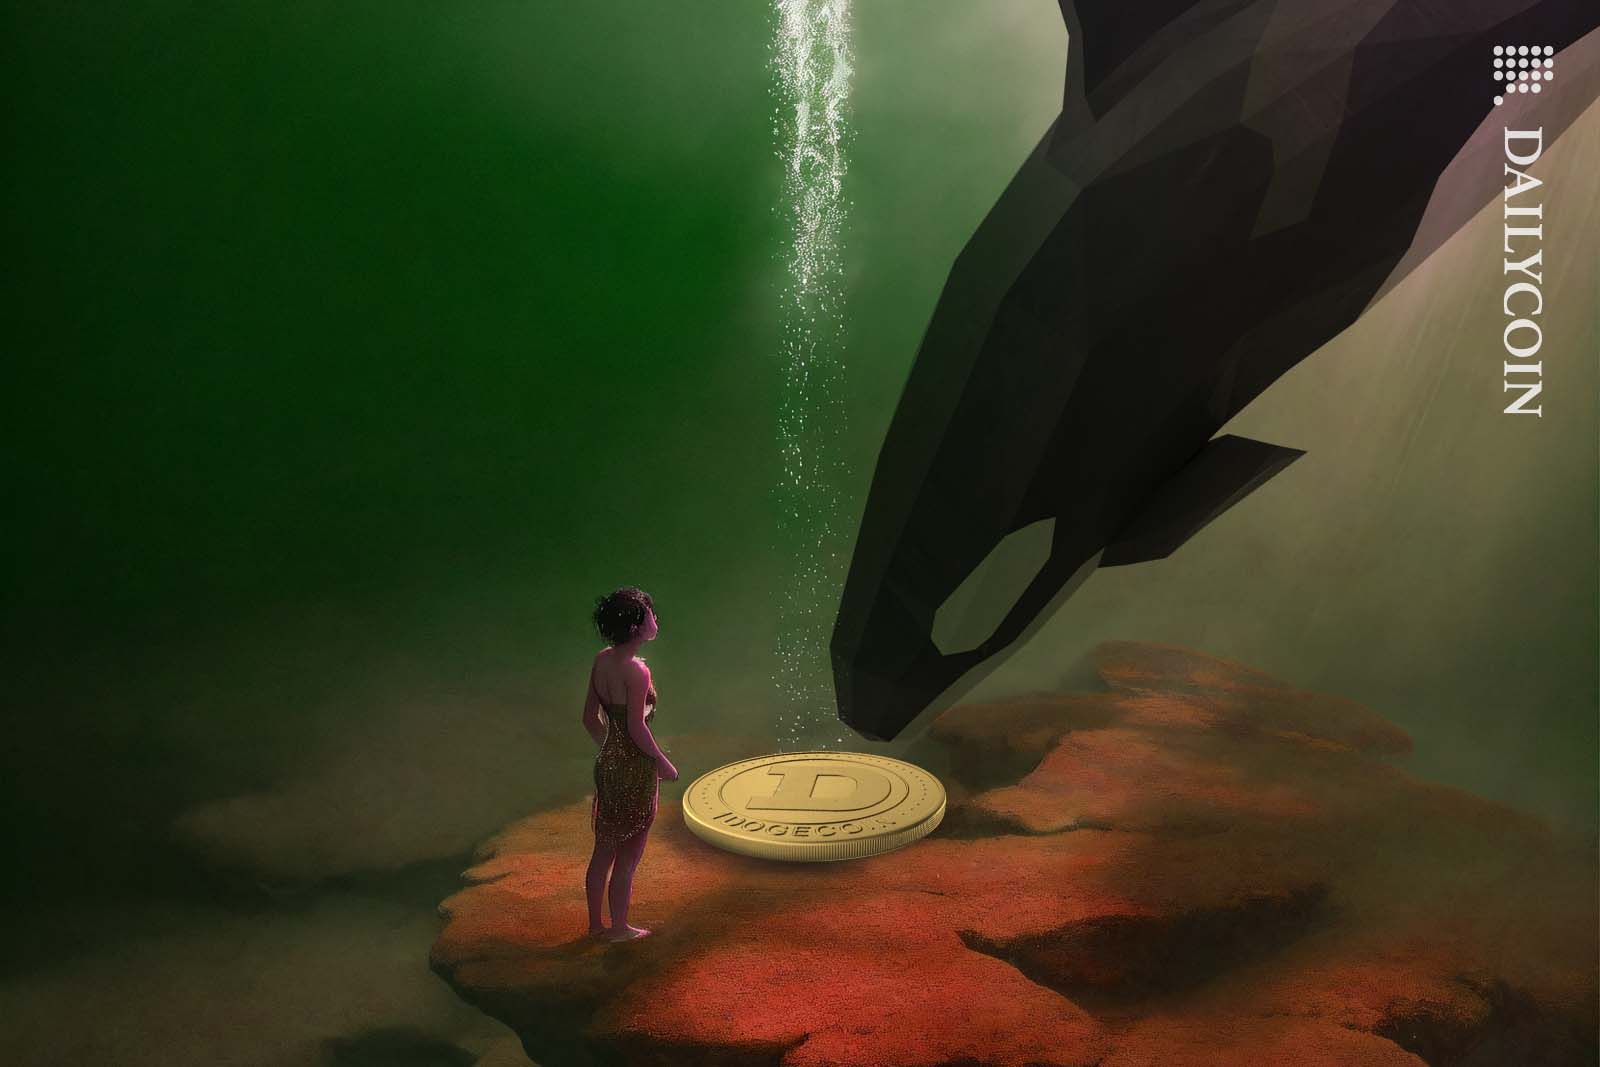 A low poly orca examining a Dogecoin on the bottom of the sea as a young girl stares at it.